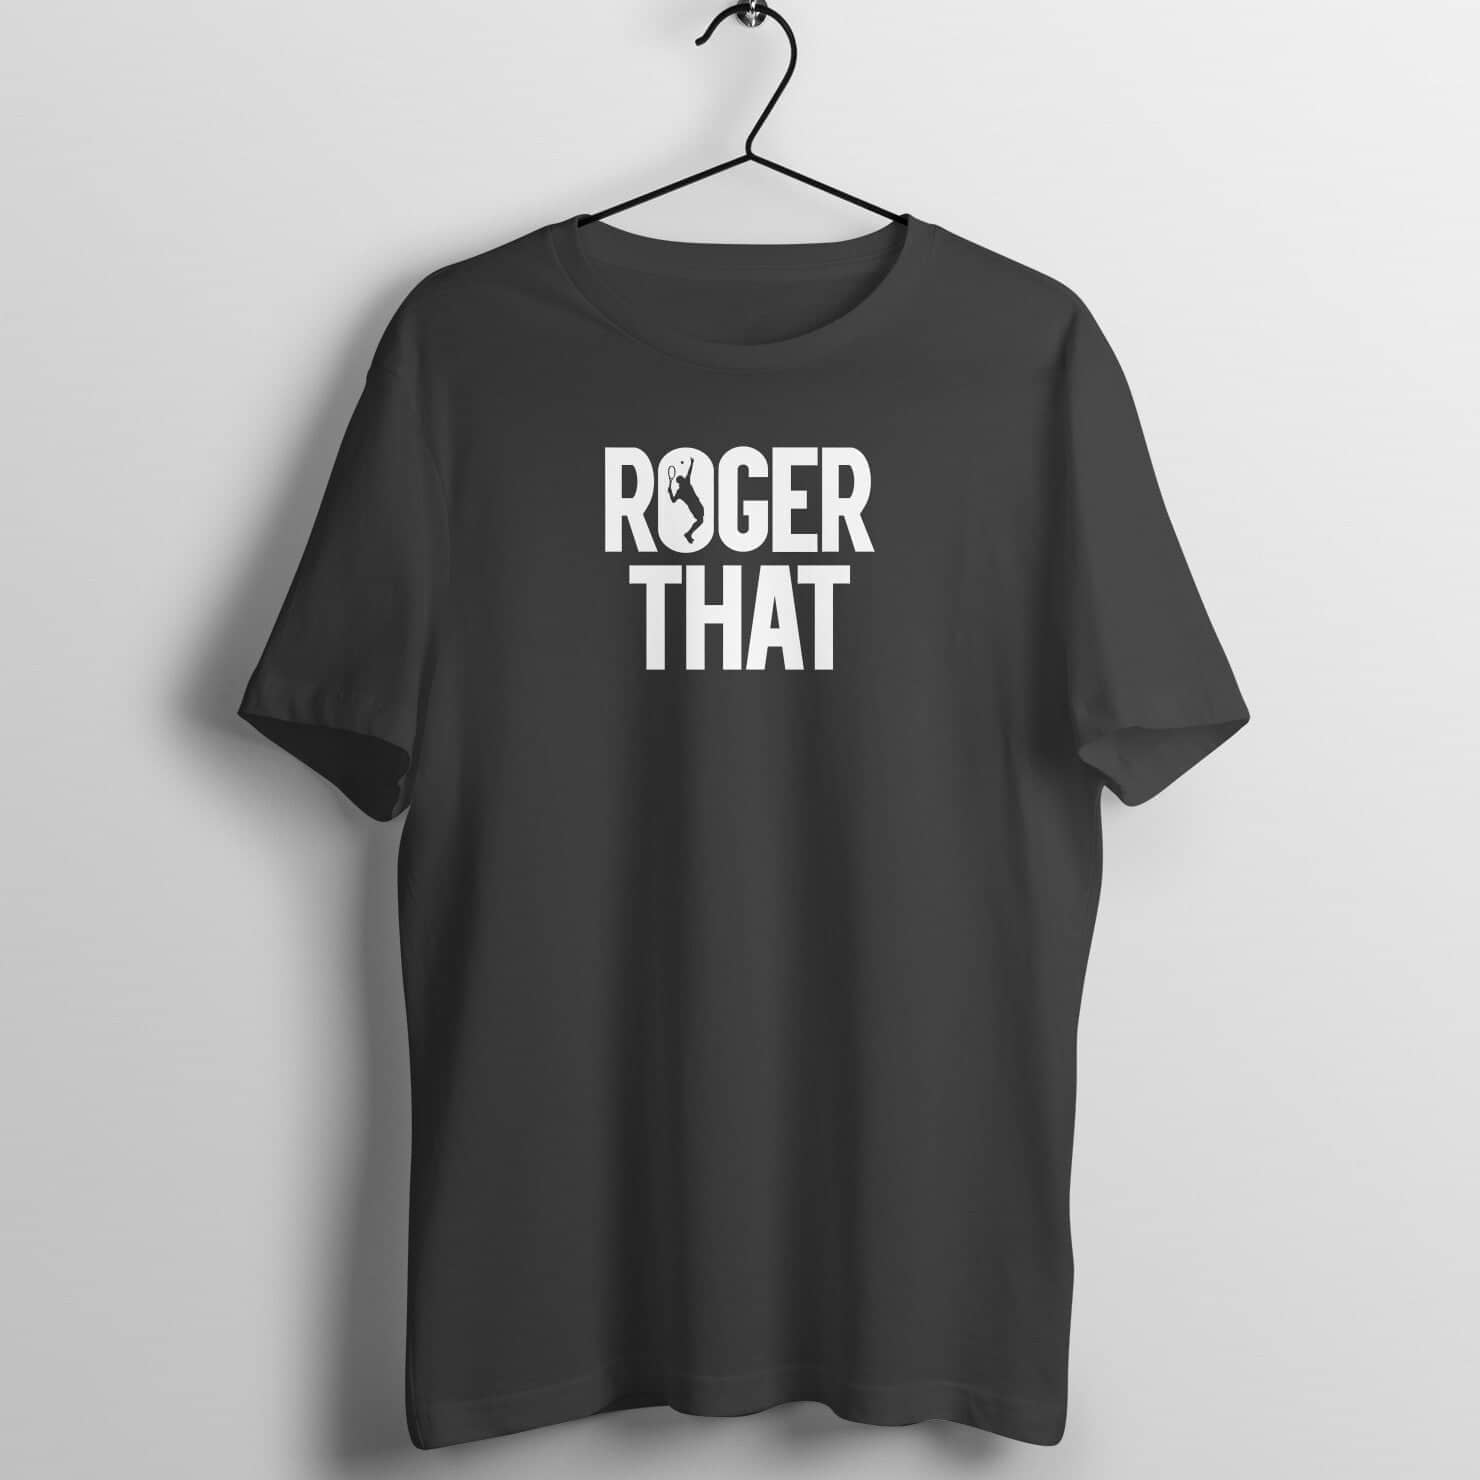 Roger That Exclusive Black Tennis T Shirt for Men and Women freeshipping - Catch My Drift India